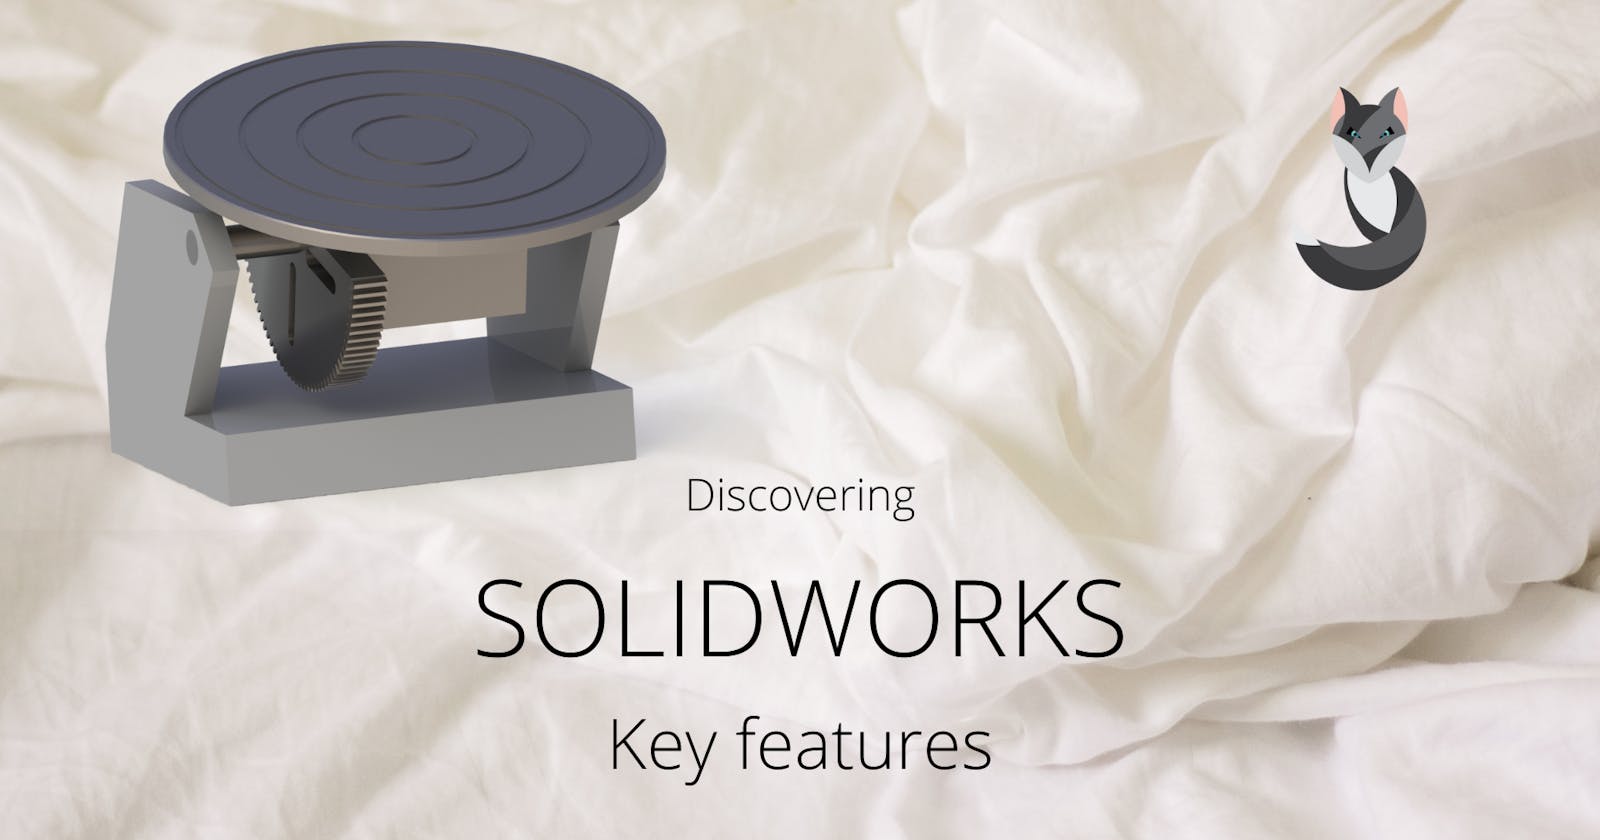 SolidWorks: The Reliable Companion for Precision and Efficient Design